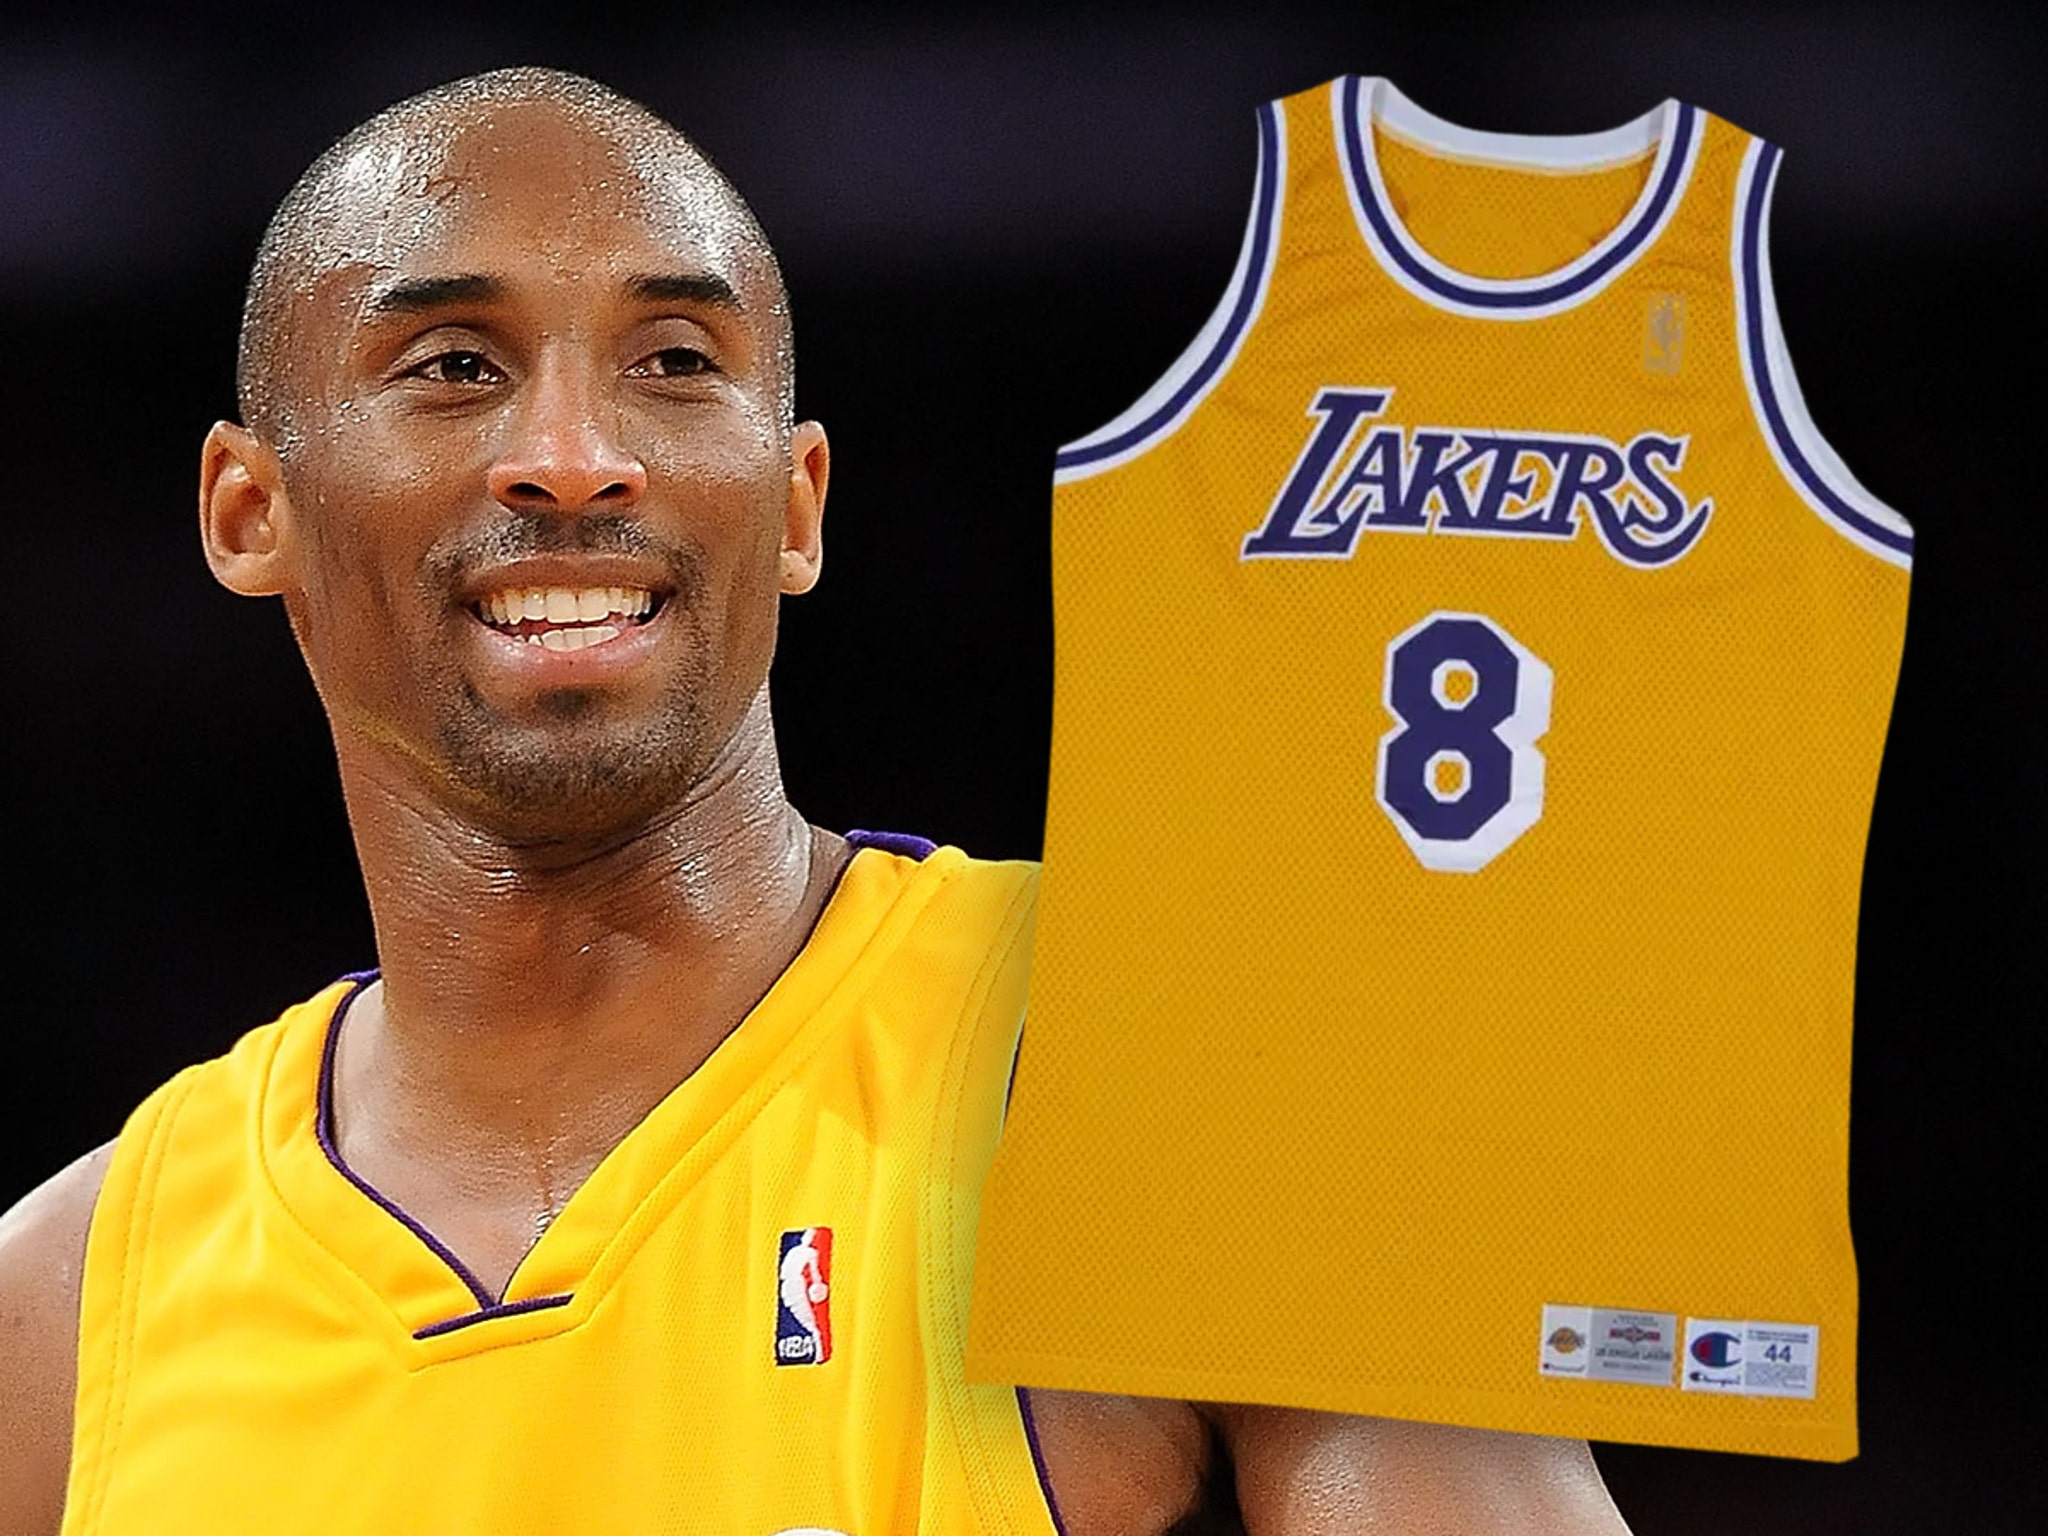 Game-Worn Kobe Bryant Rookie Jersey Expected to Fetch $5 Million